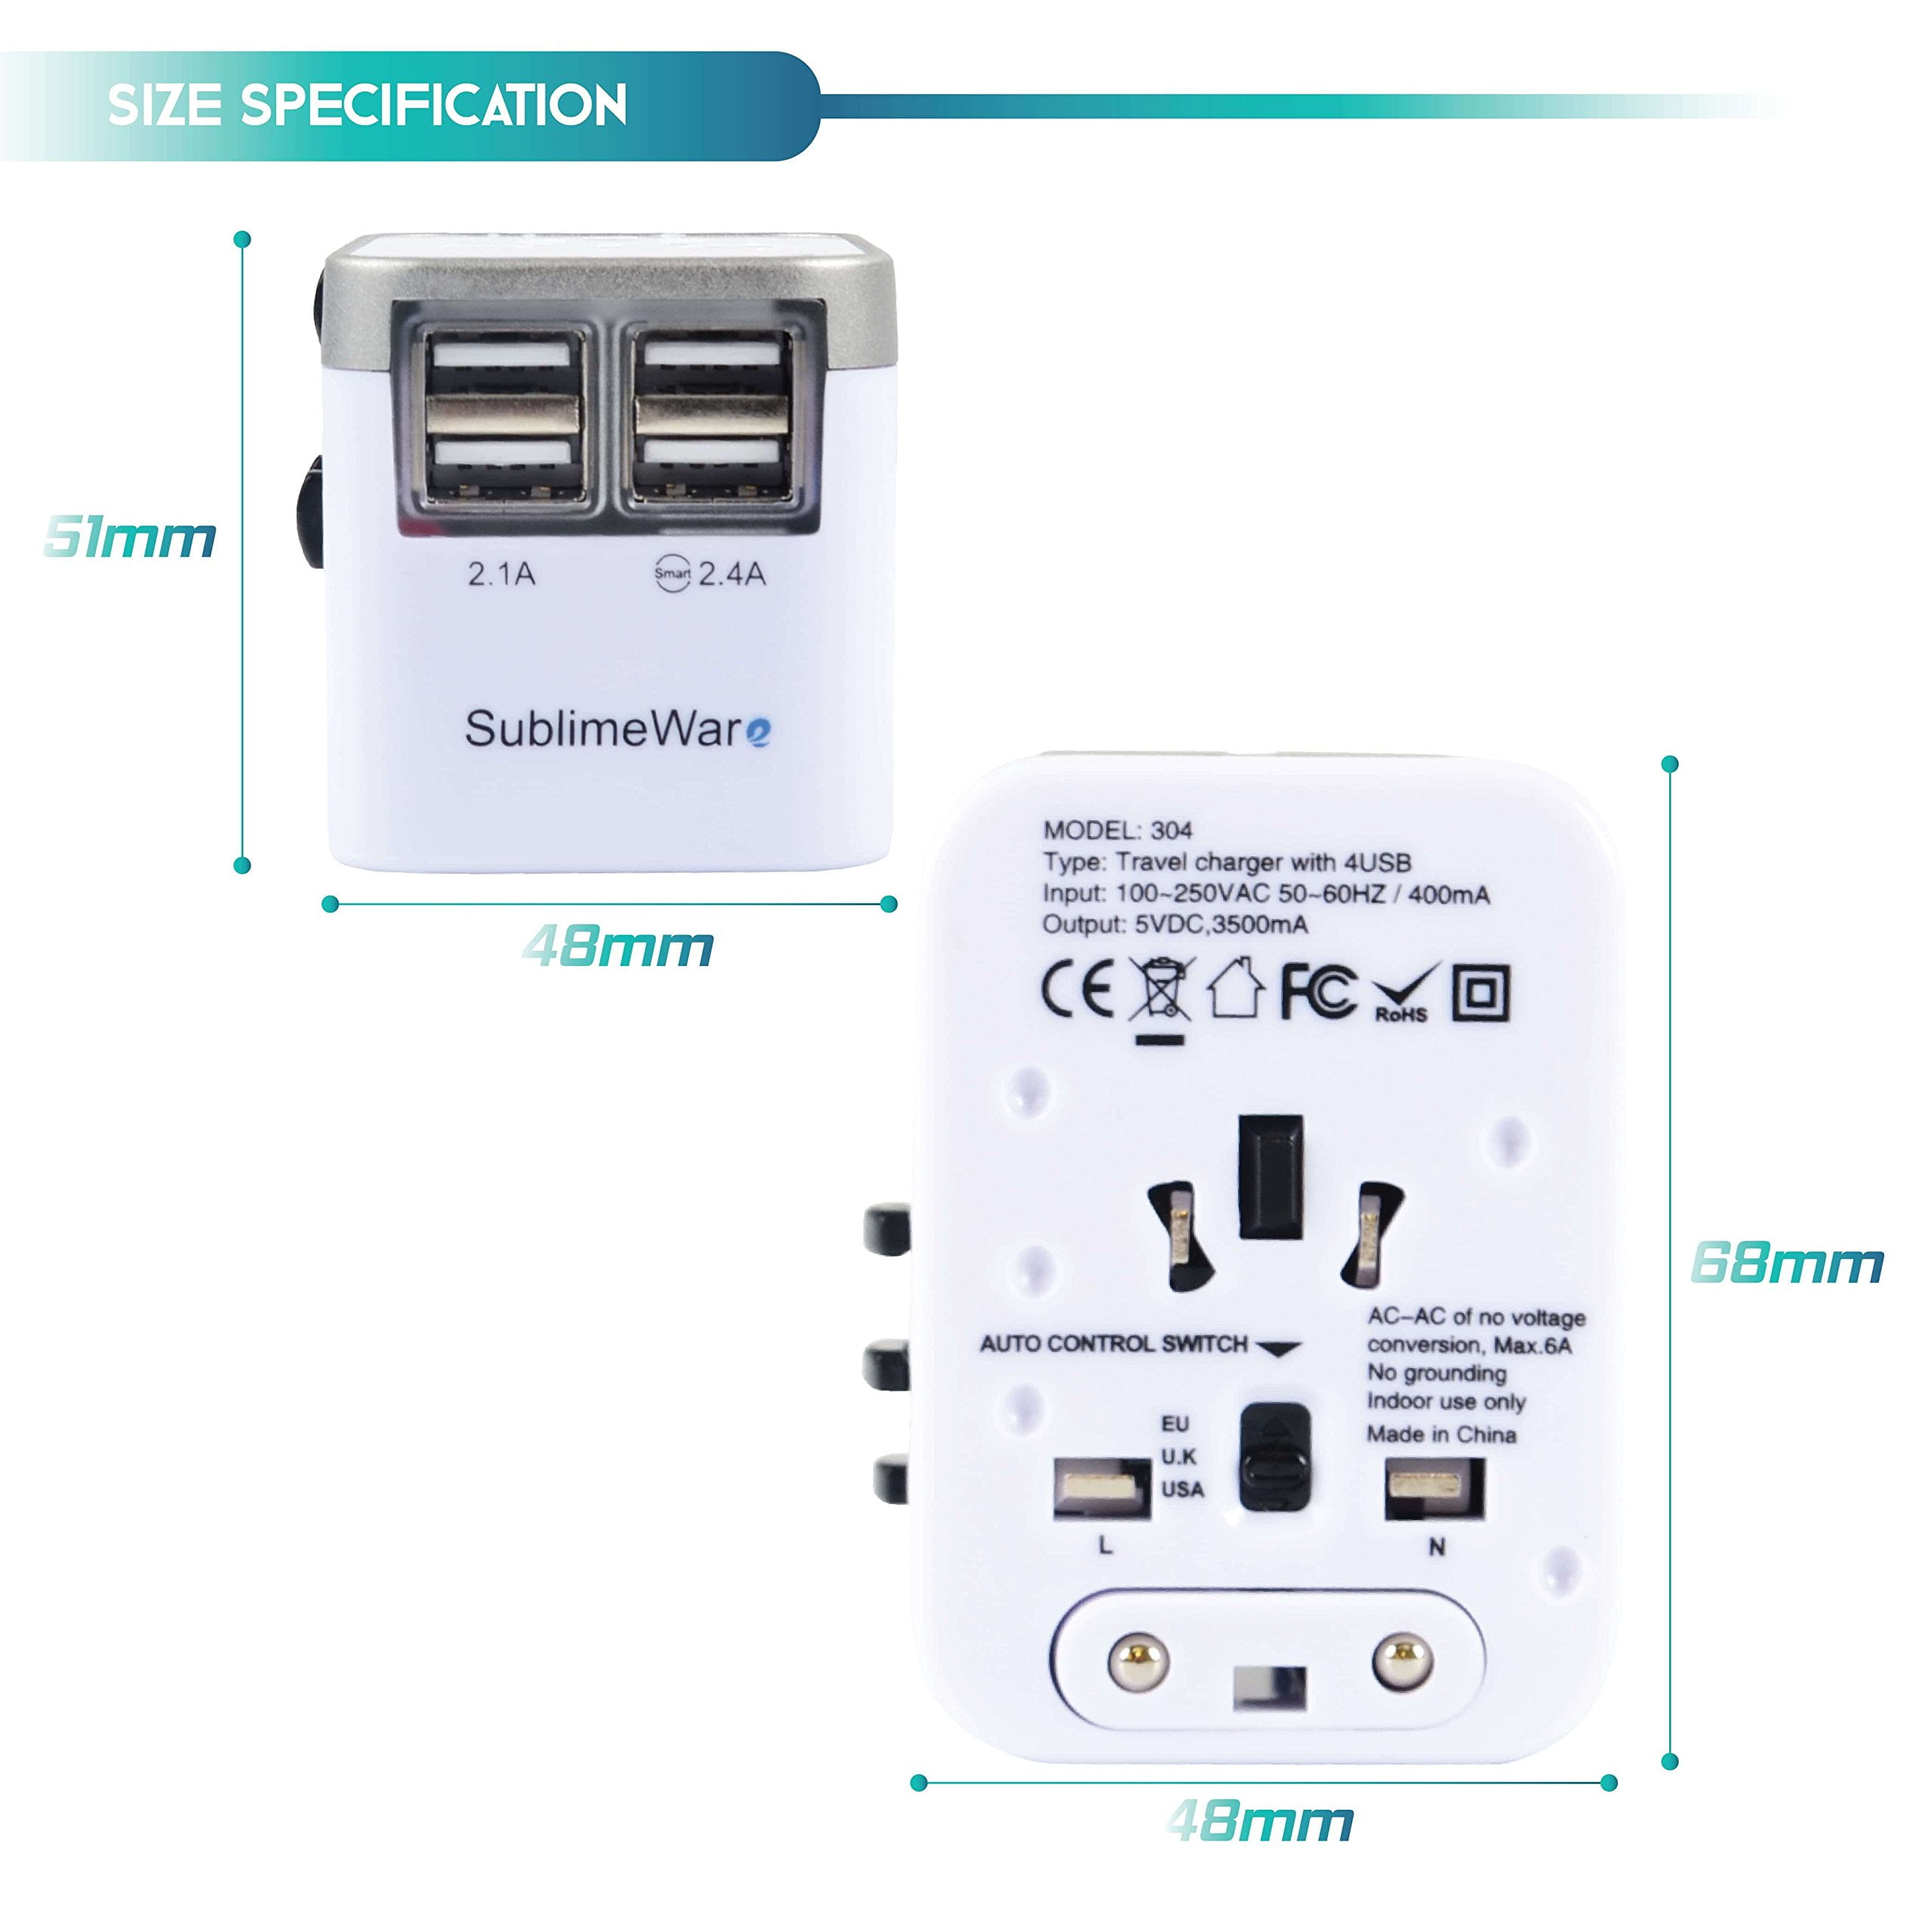 220 Volt Adapter International Travel Power Plug Adapter Travel Adapter Type C Type A Type G Type I f for UK Japan China EU Europe European By SublimeWare w/4 USB Ports Work for 150+ Countries